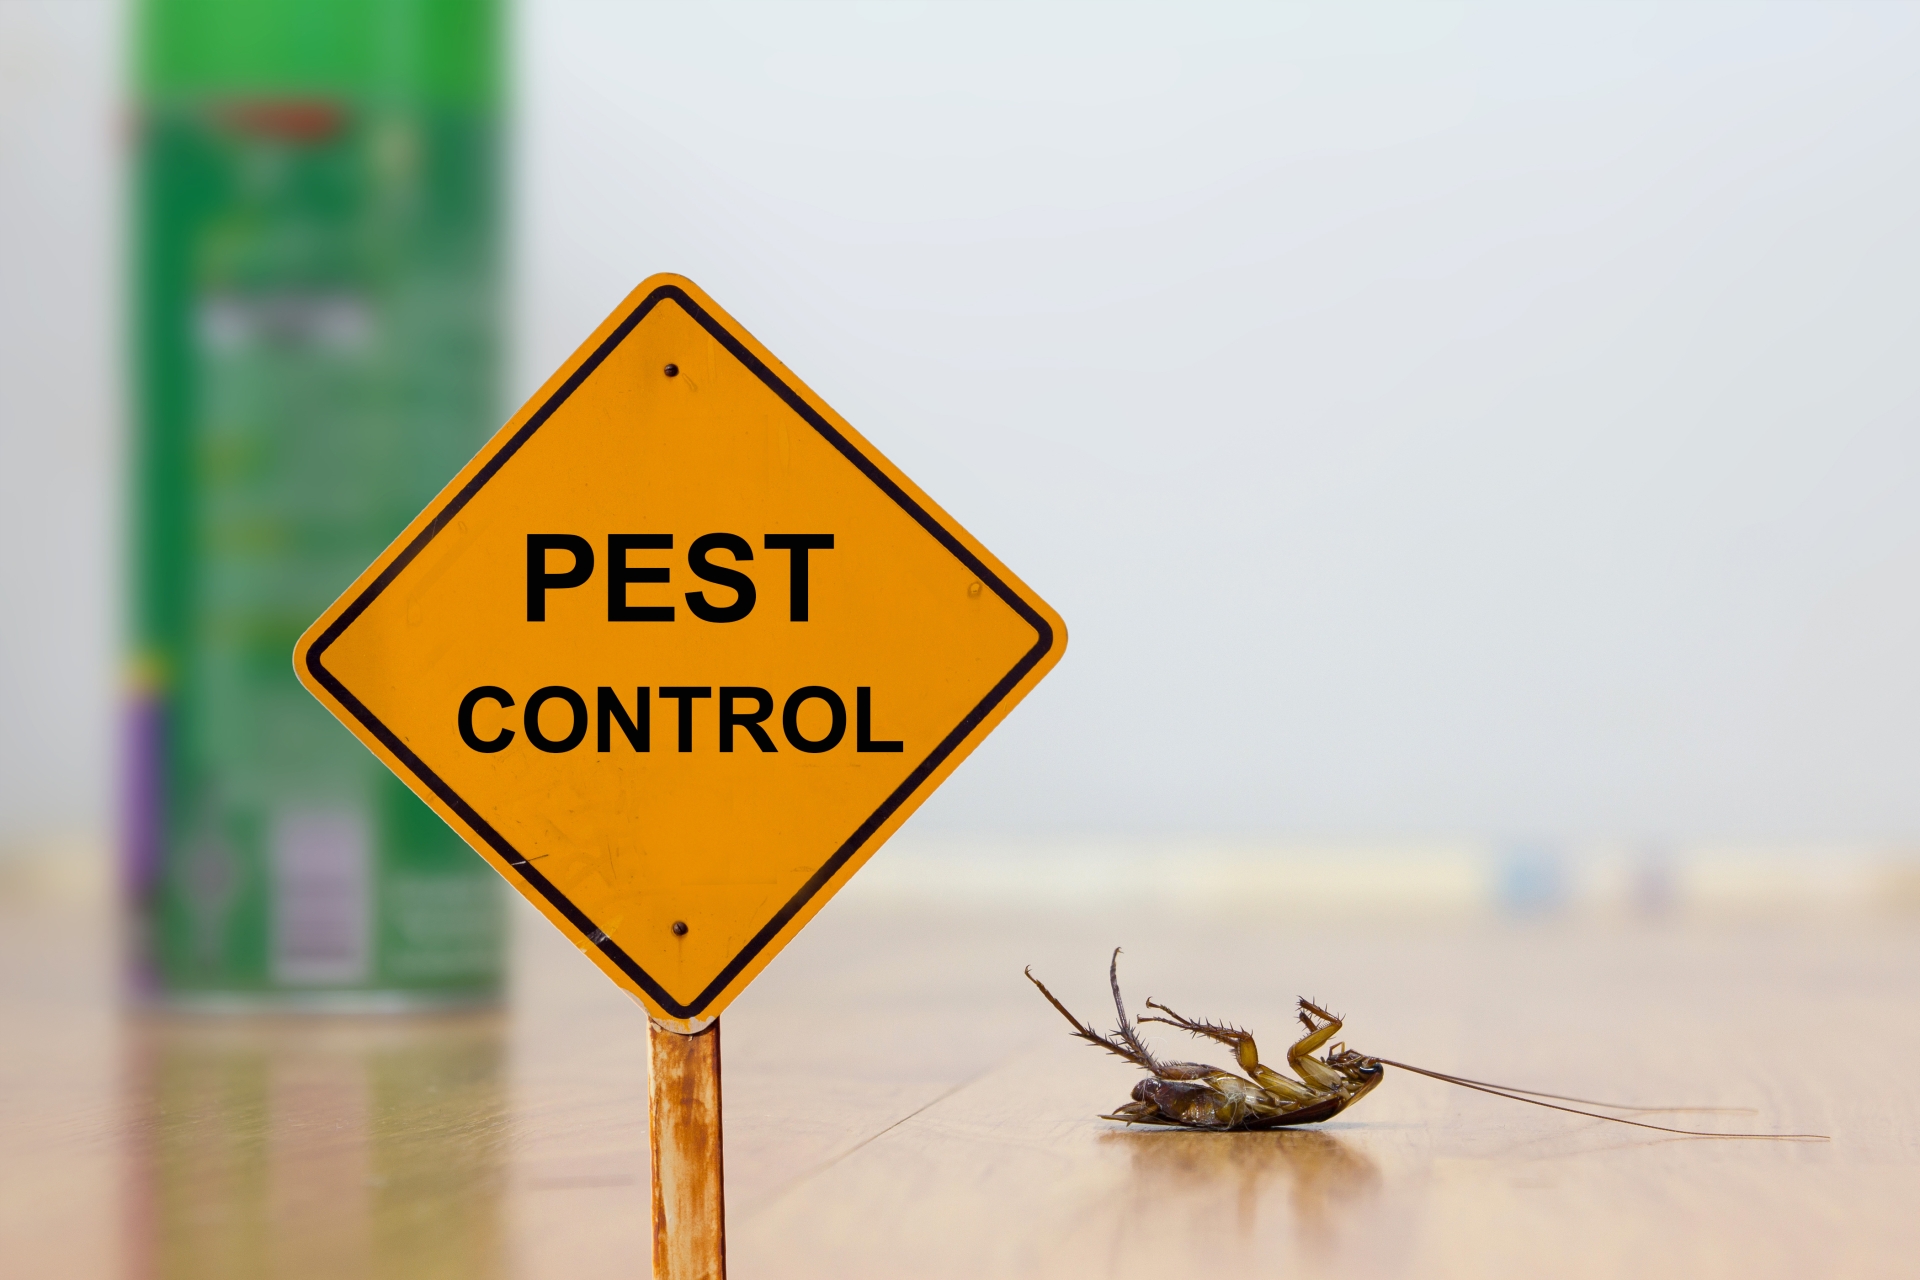 24 Hour Pest Control, Pest Control in Richmond, TW9, TW10. Call Now 020 8166 9746